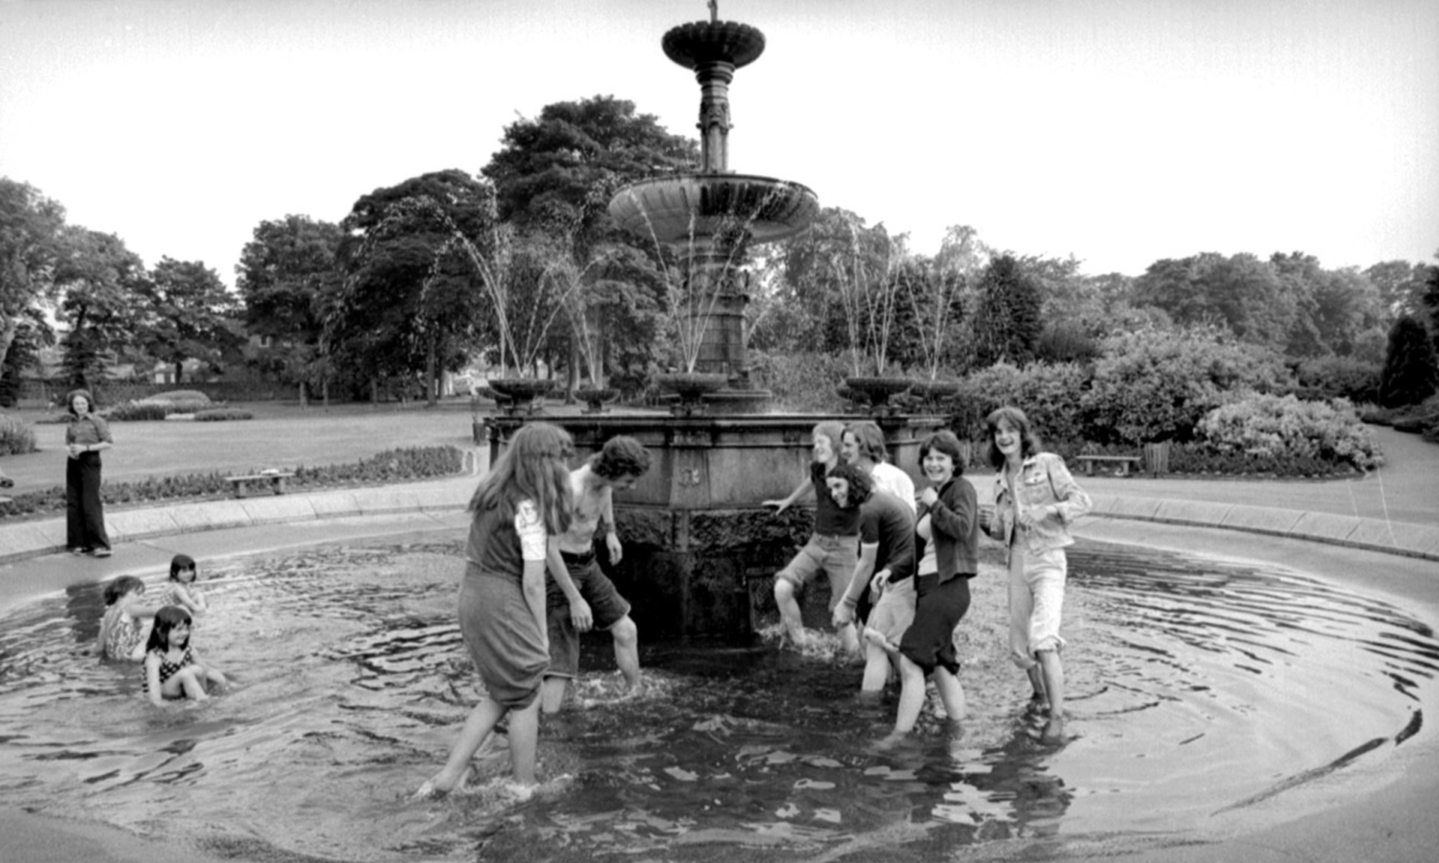 Sufficient funding has been secured to begin restoration of Aberdeen's Victoria Park fountain. The P&J photographed these youngsters cooling off in the 1976 heatwave - volunteers hope good times will soon return to the beleaguered water feature